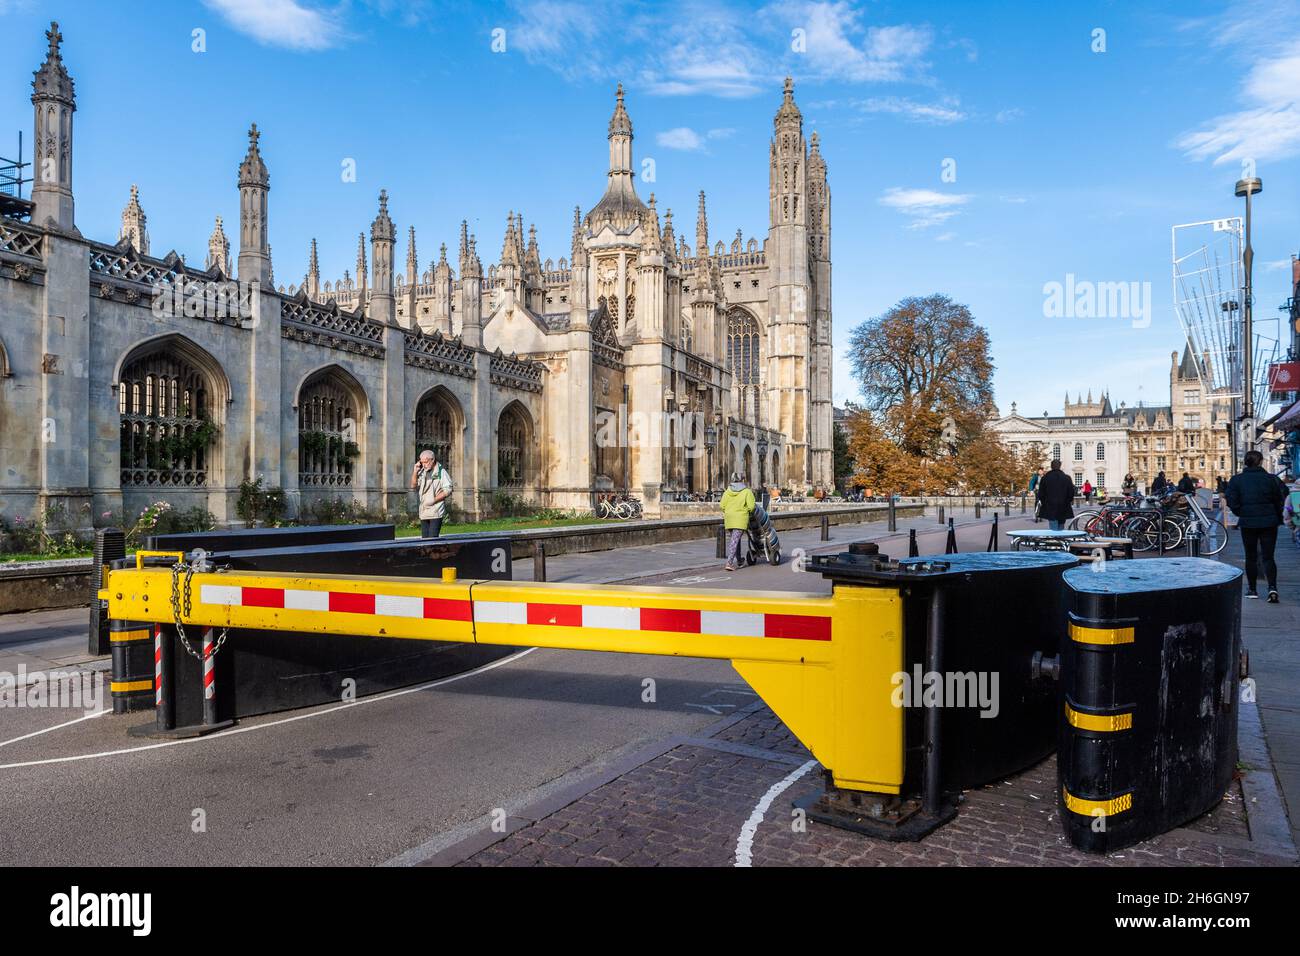 King's College with terrorist prevention barriers, Cambridge, UK. Stock Photo